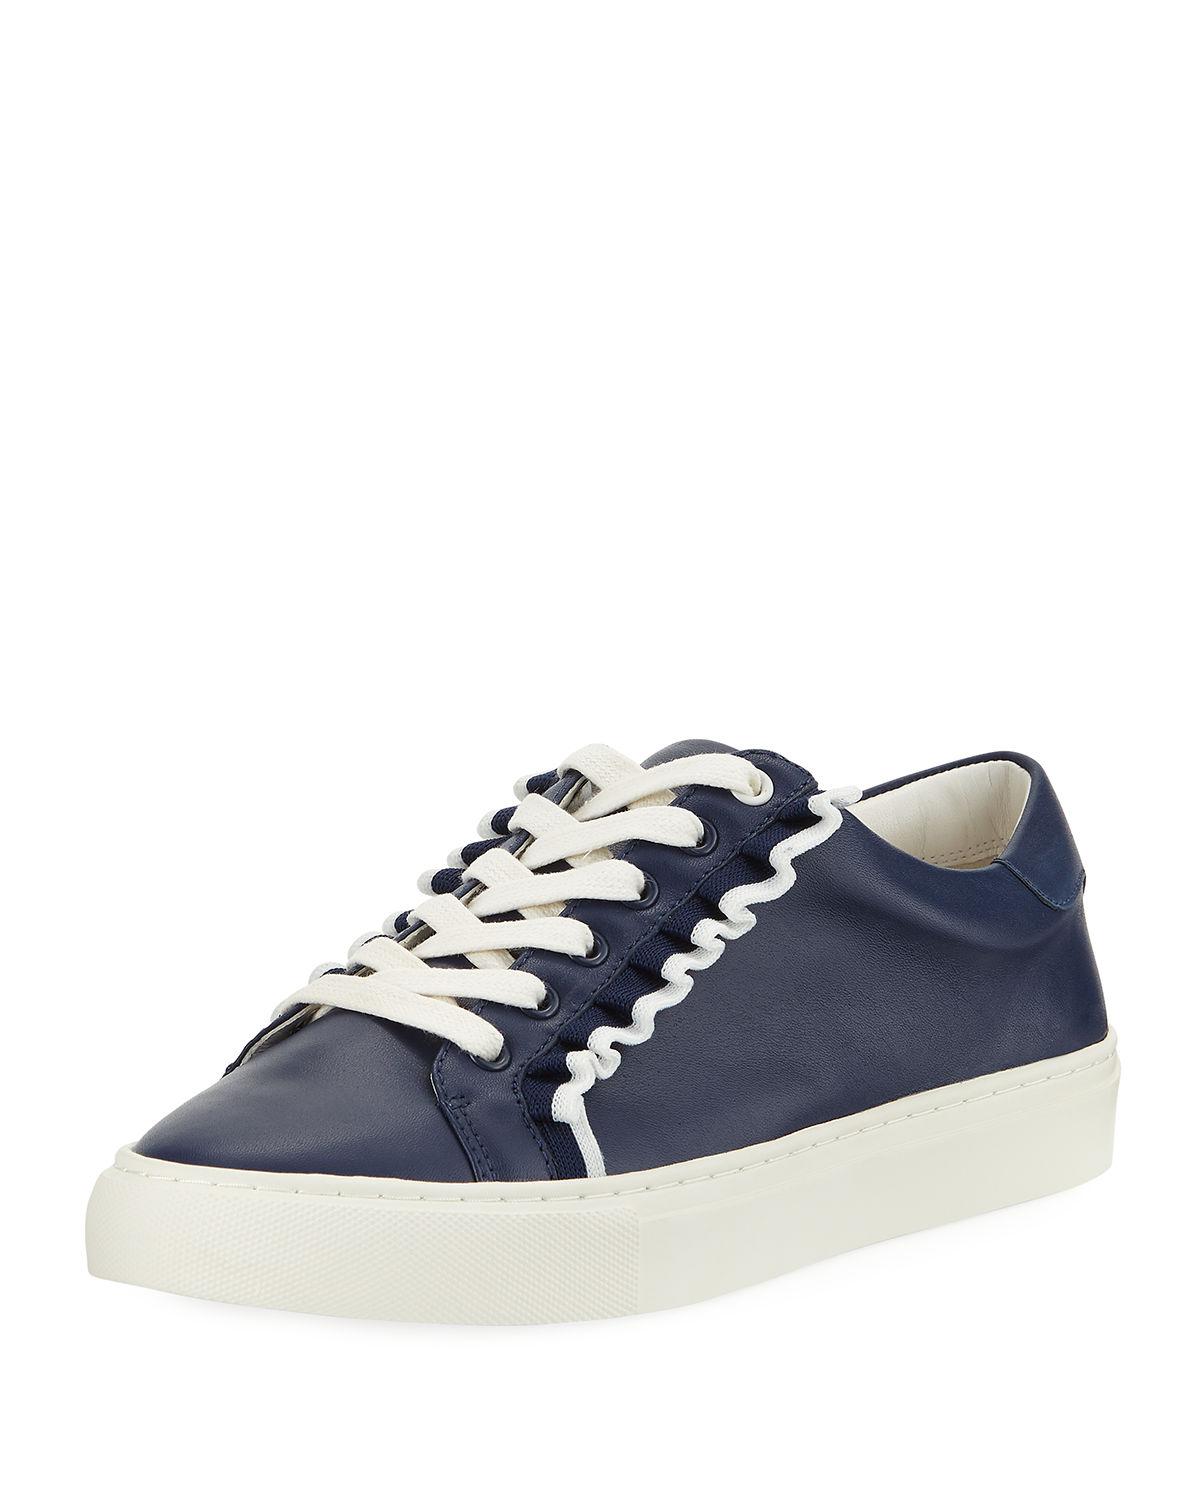 Tory Sport Ruffle Leather Low-top Sneakers in Blue - Save 56% - Lyst